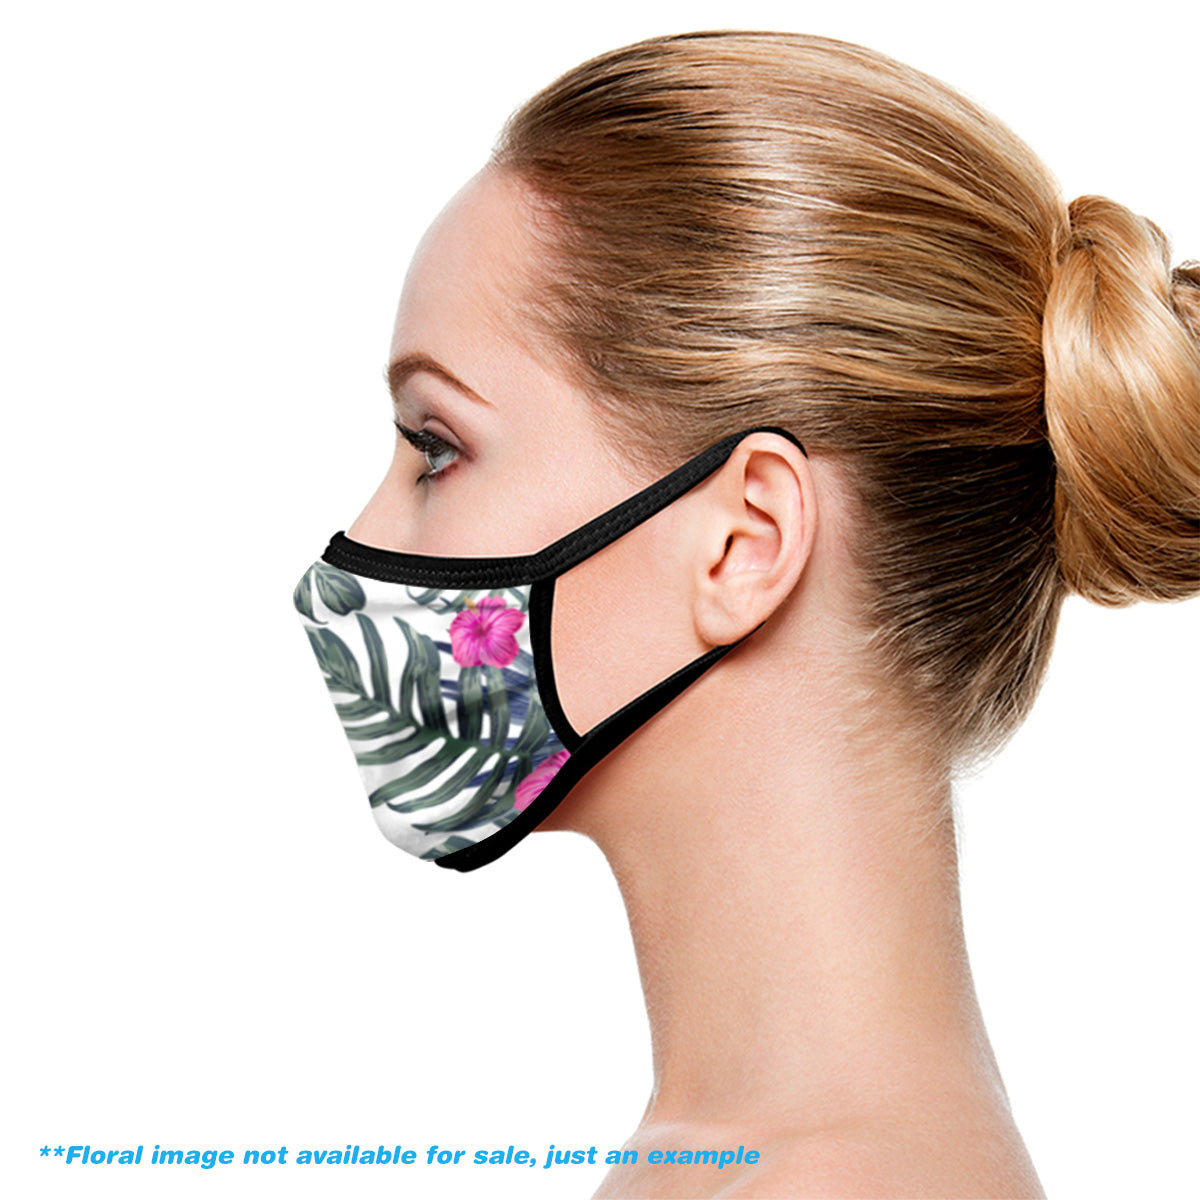 2 LAYER FACE MASK - SUBLIMATION